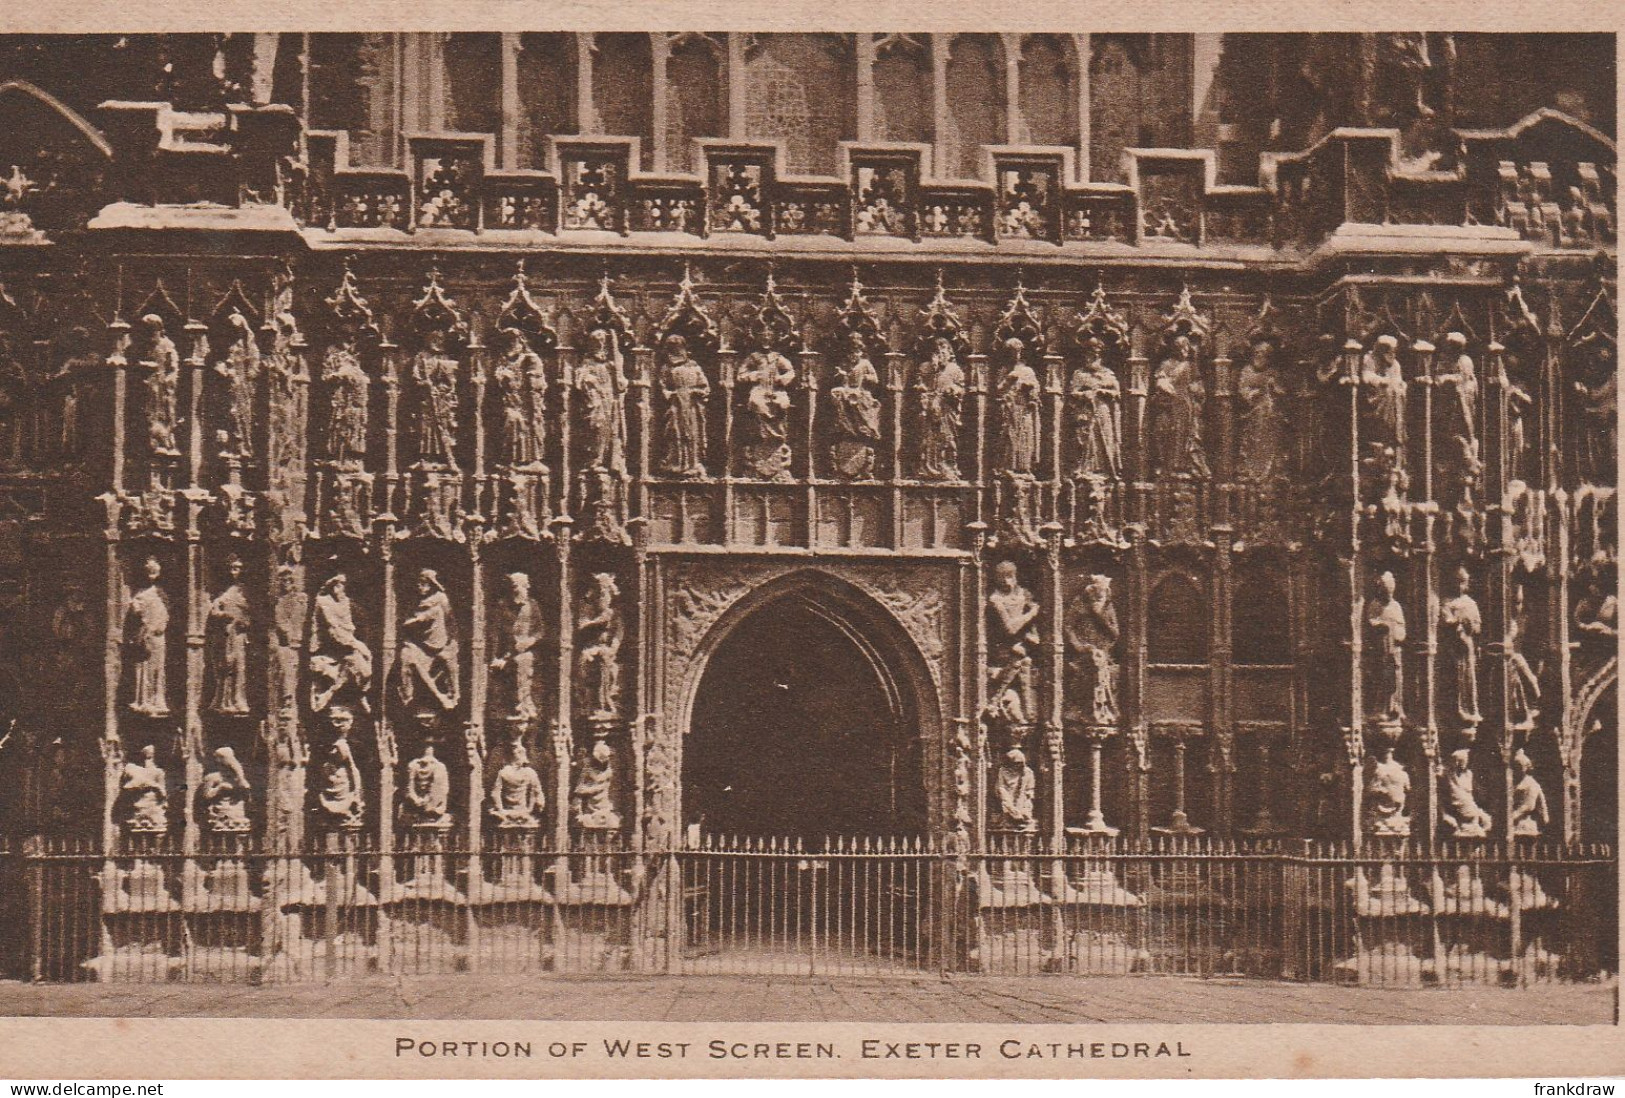 Postcard - Portion Of West Screen, Exeter Cathedral - No Card No  - Very Good - Unclassified